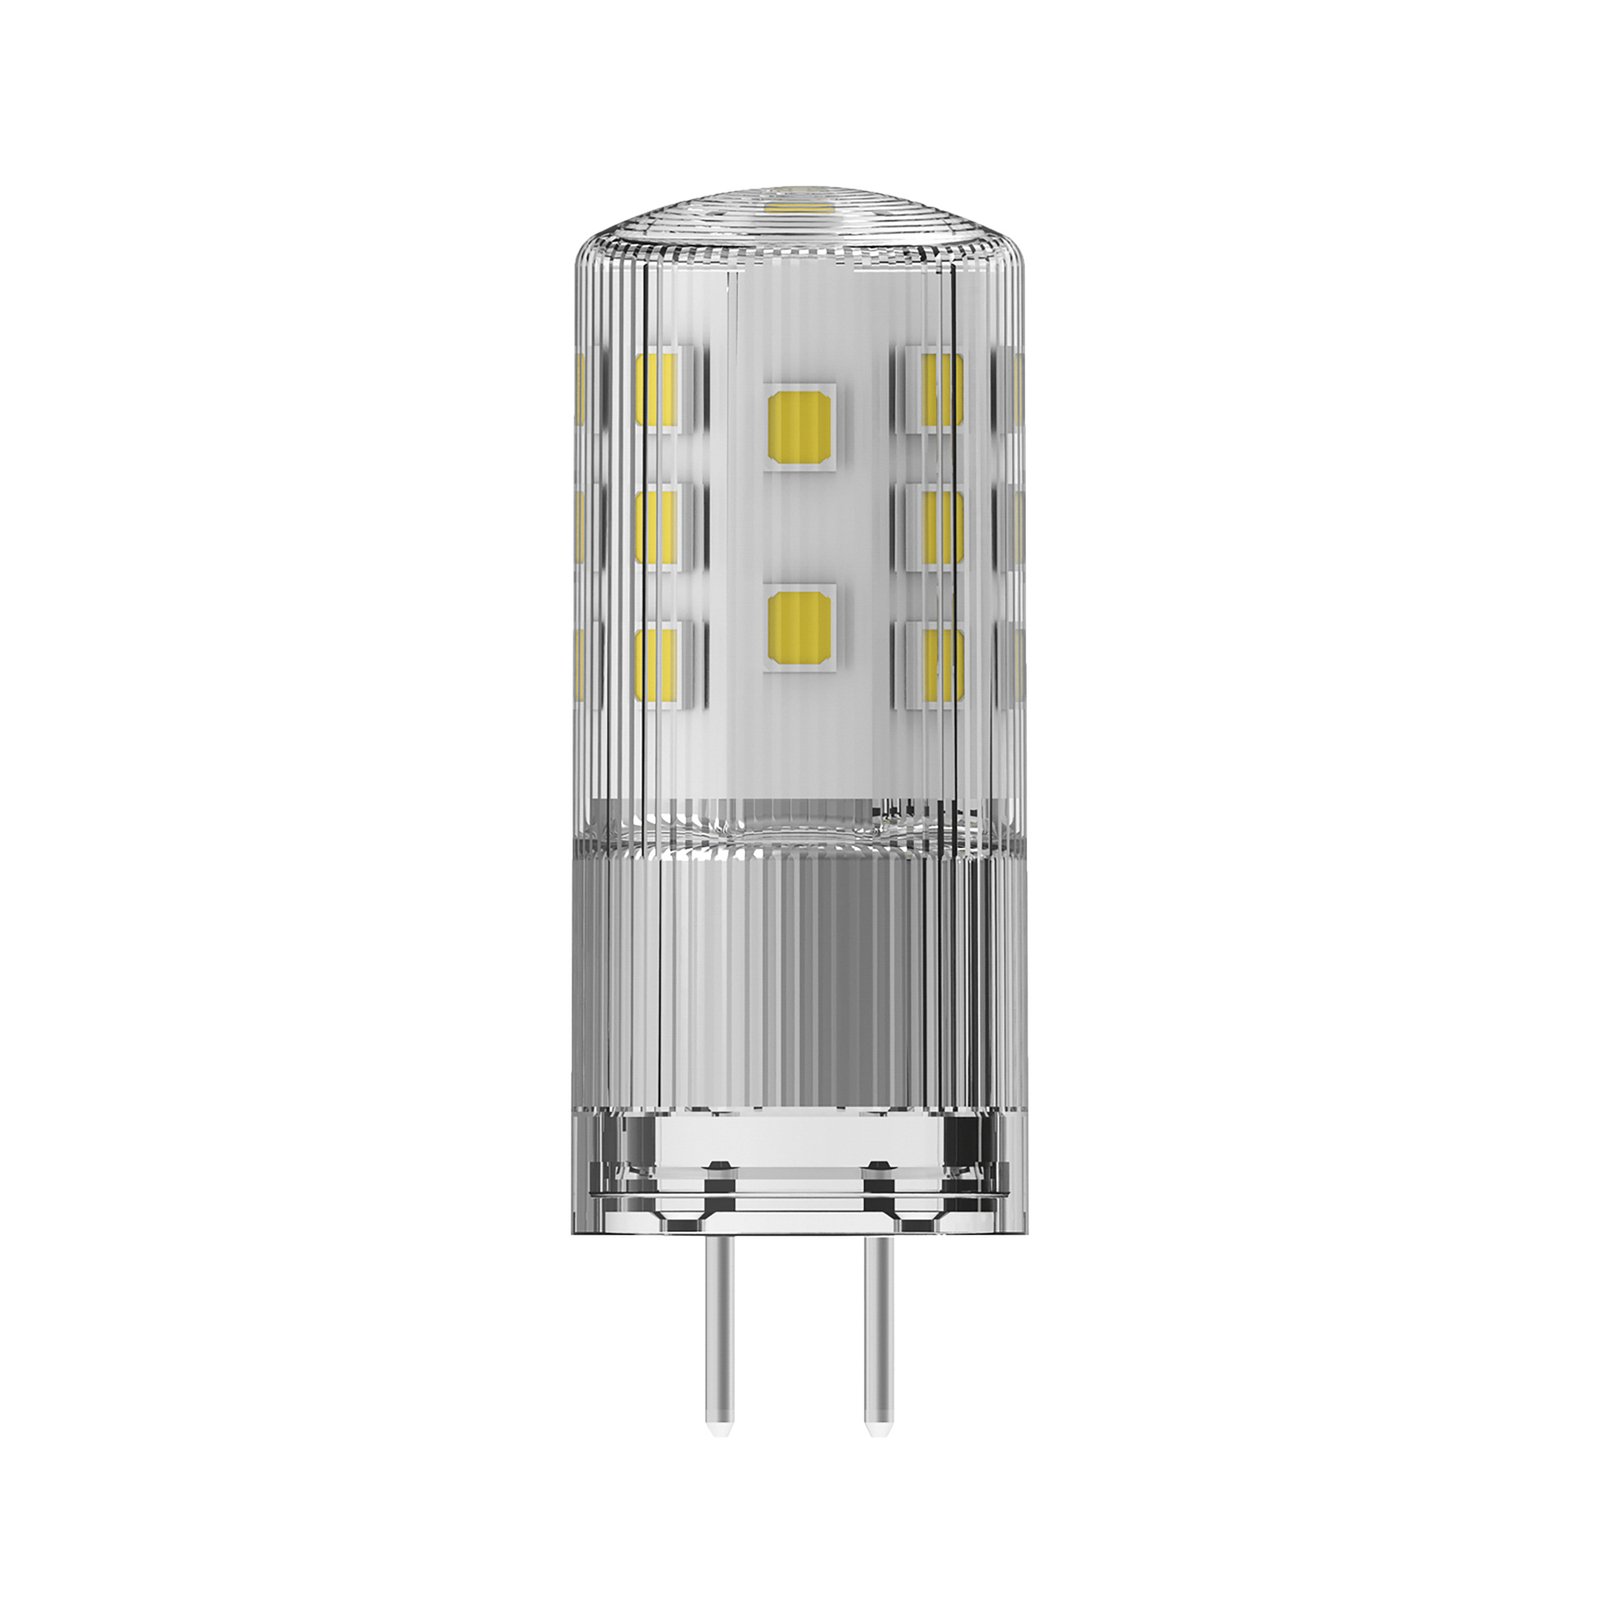 Radium LED Star PIN GY6.35 4.5W 470lm dimmable 12V